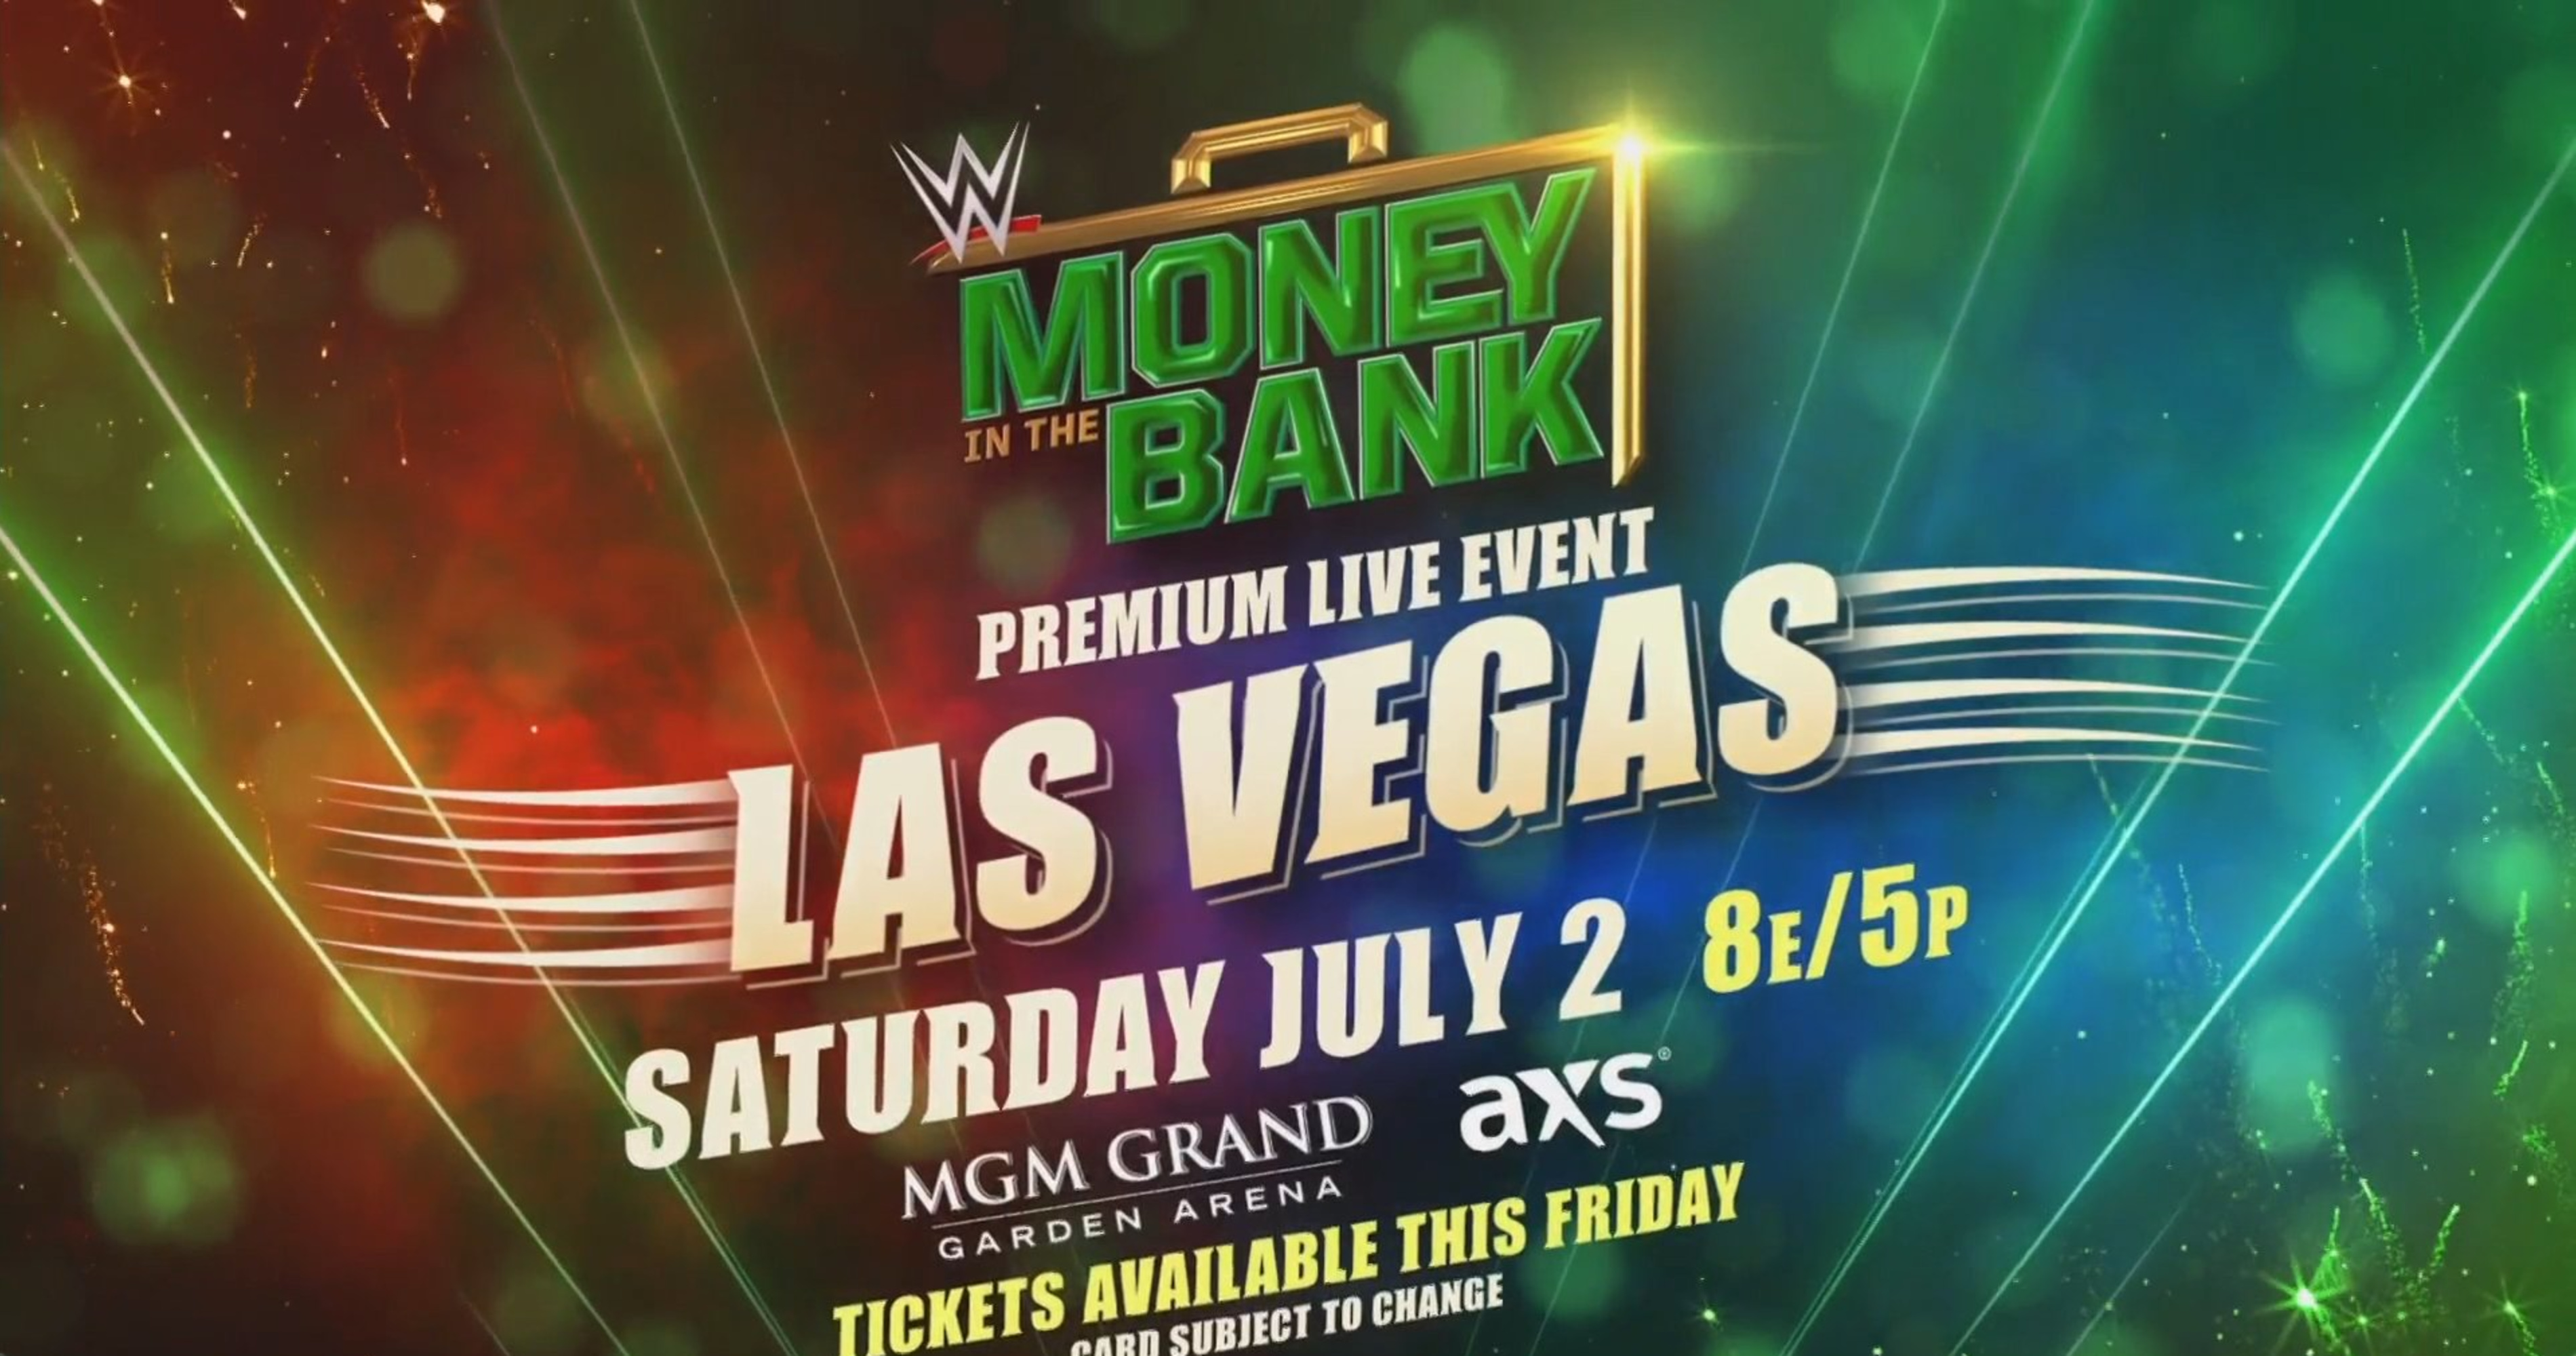 Early Predictions For WWE Money in the Bank 2022 Match Card News